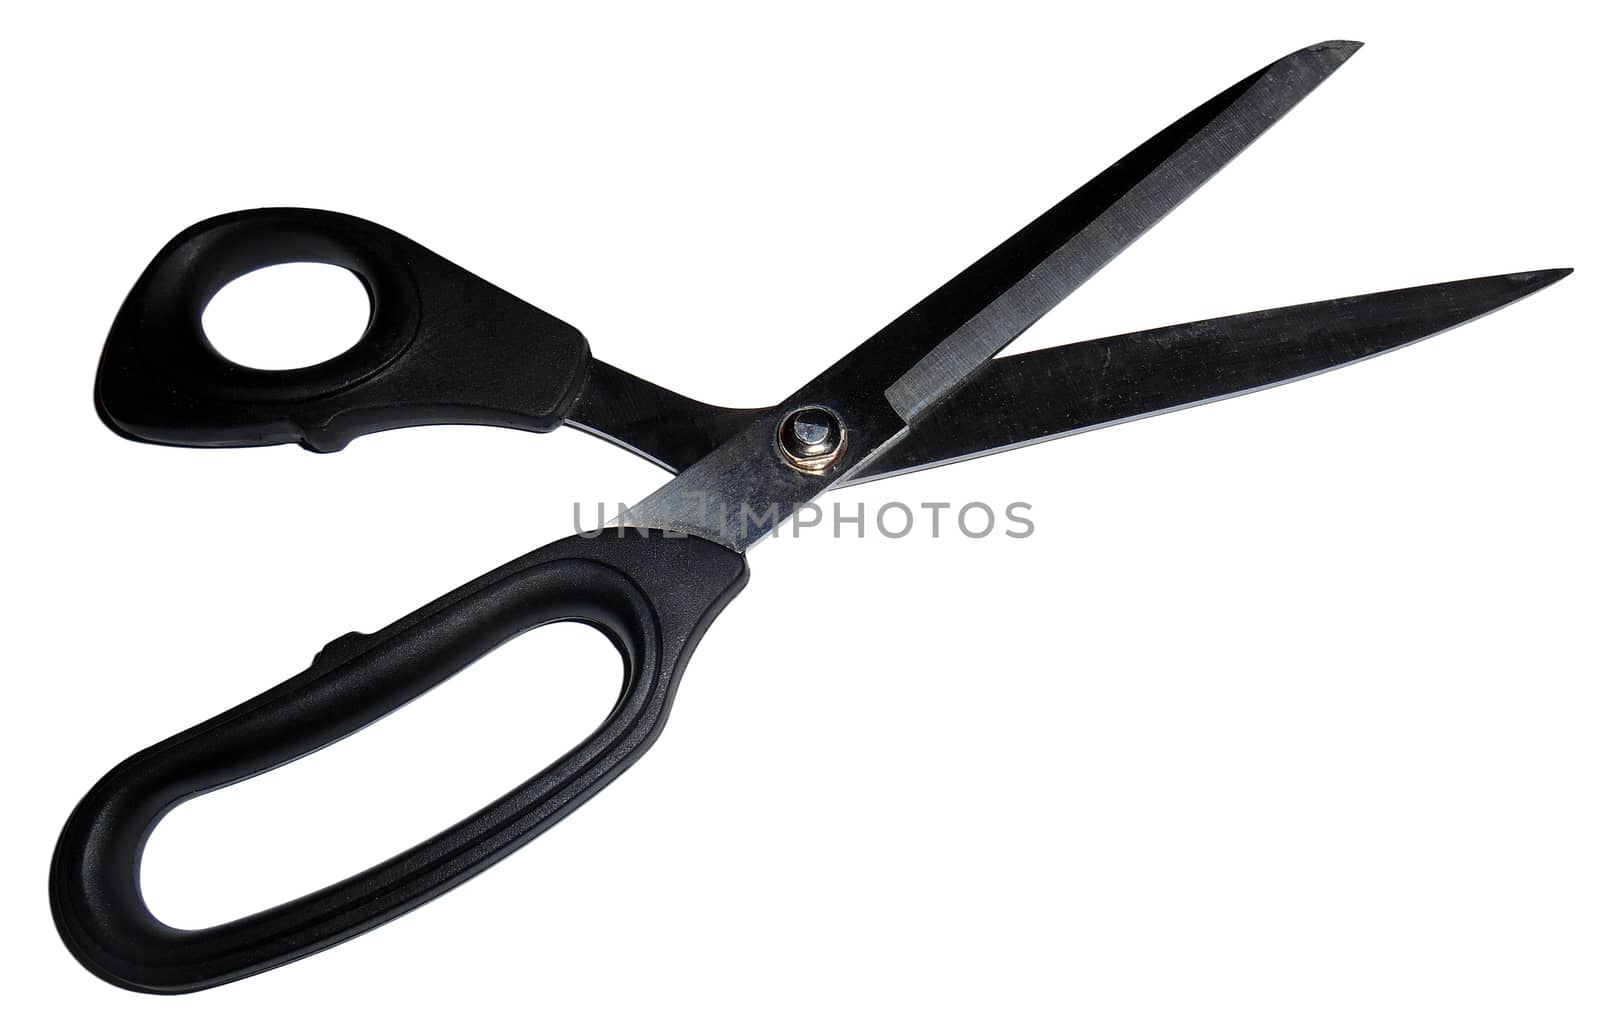 Scissors isolated on white background.

Picture taken on November 22, 2014.